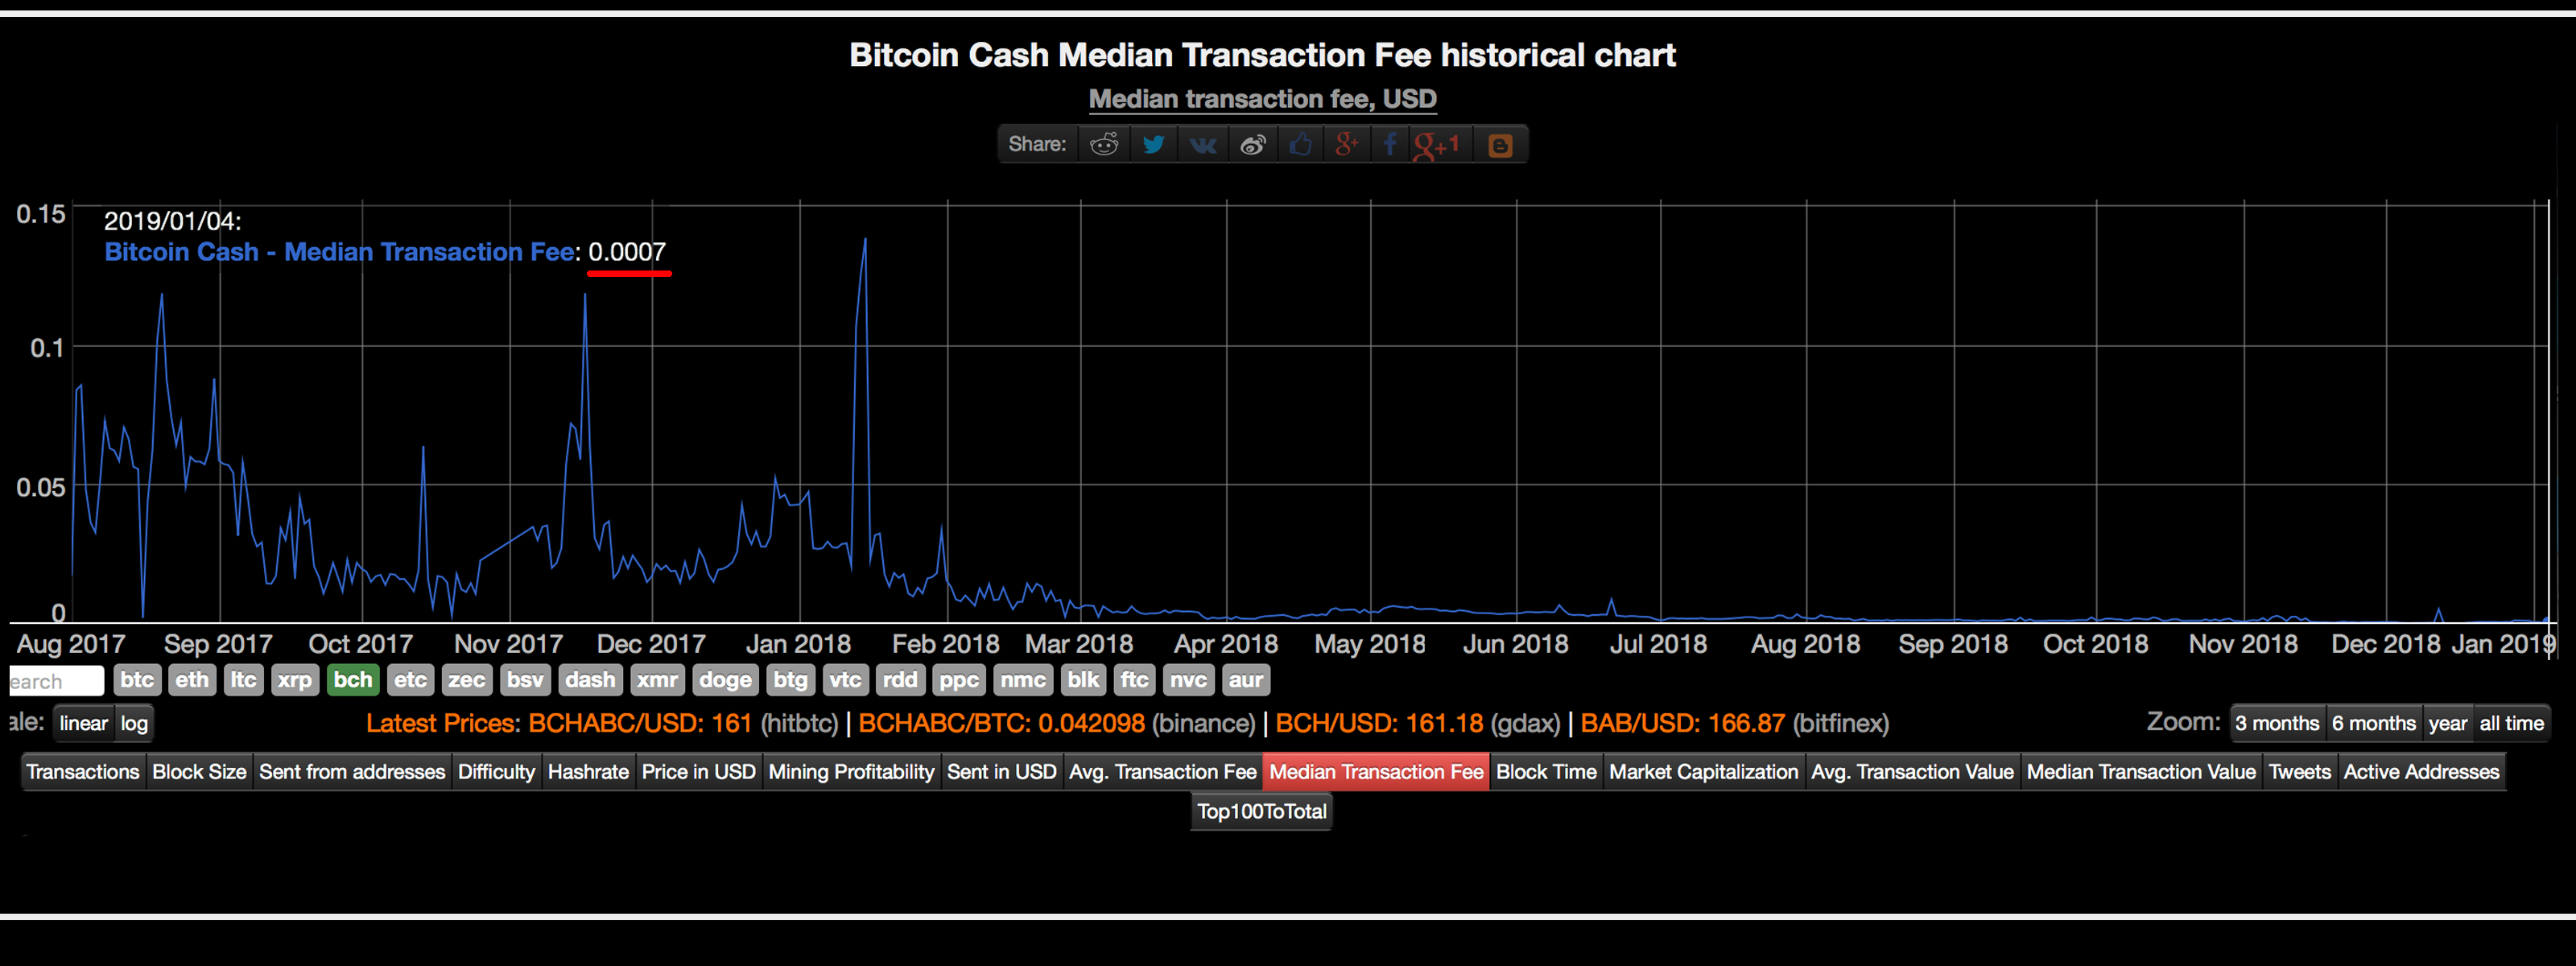 Bitcoin Cash Transaction Fees Were Less Than A Cent Throughout Most - 